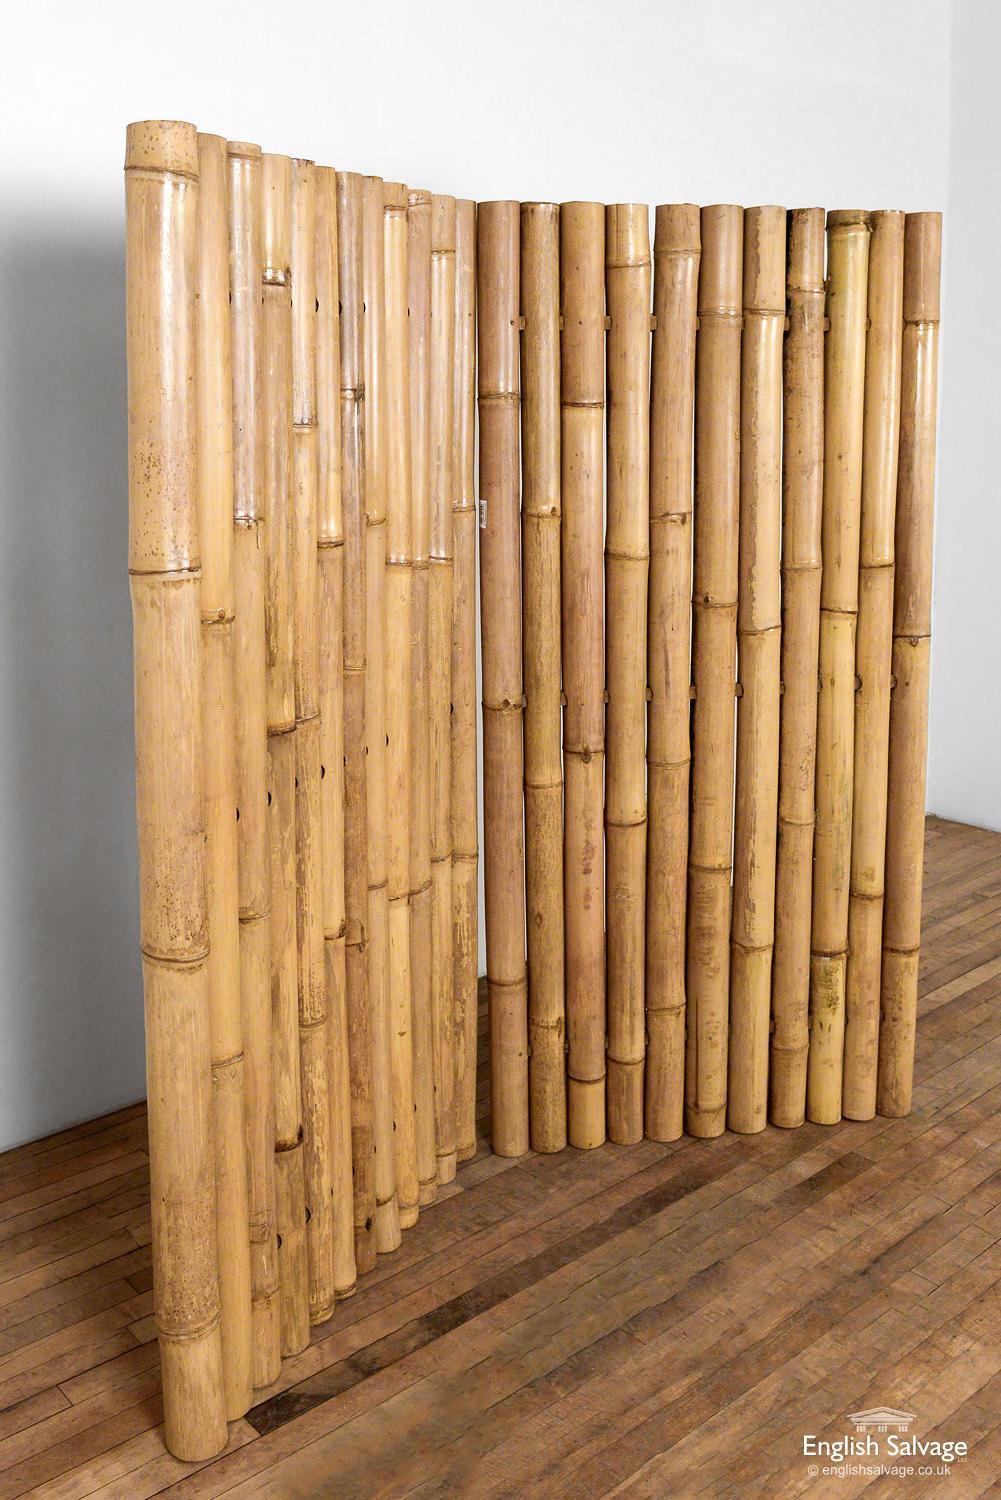 Large fence panels / screening made from giant bamboo canes. These make striking natural dividers or panels to separate or screen off areas of the garden.